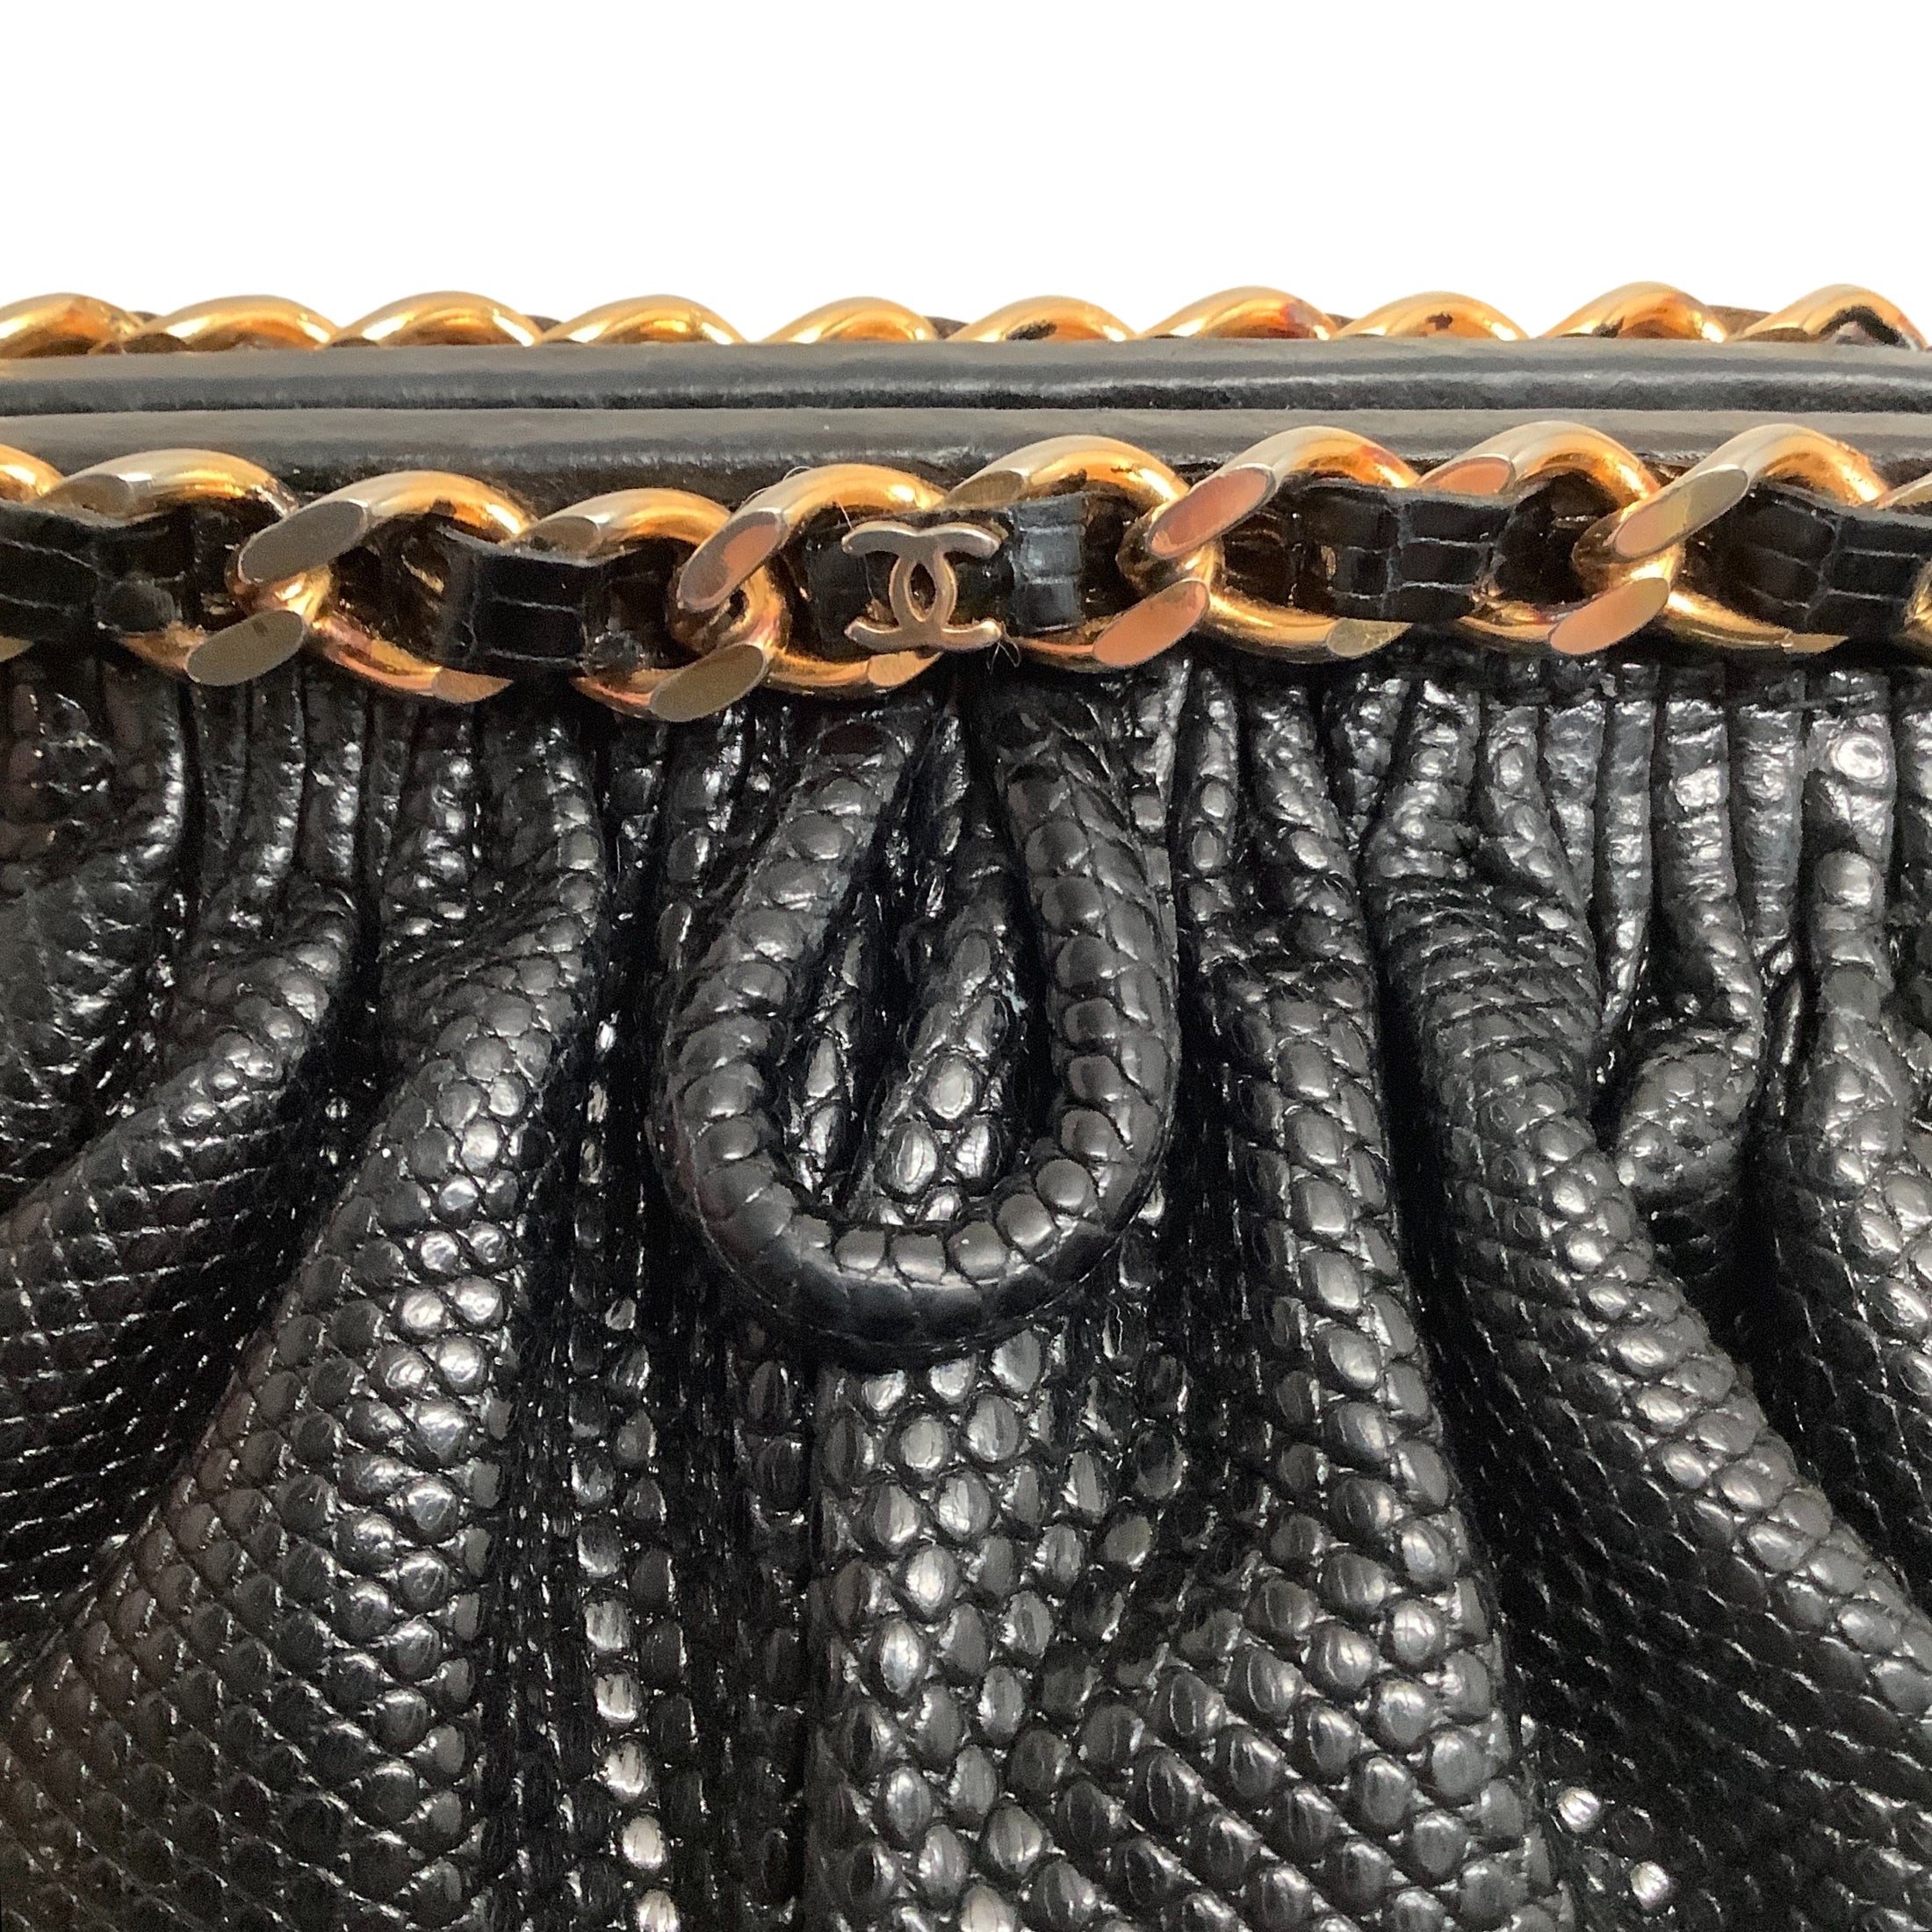 Chanel Vintage 1980's Black Nappa Leather Frame Bag with Chain Detail